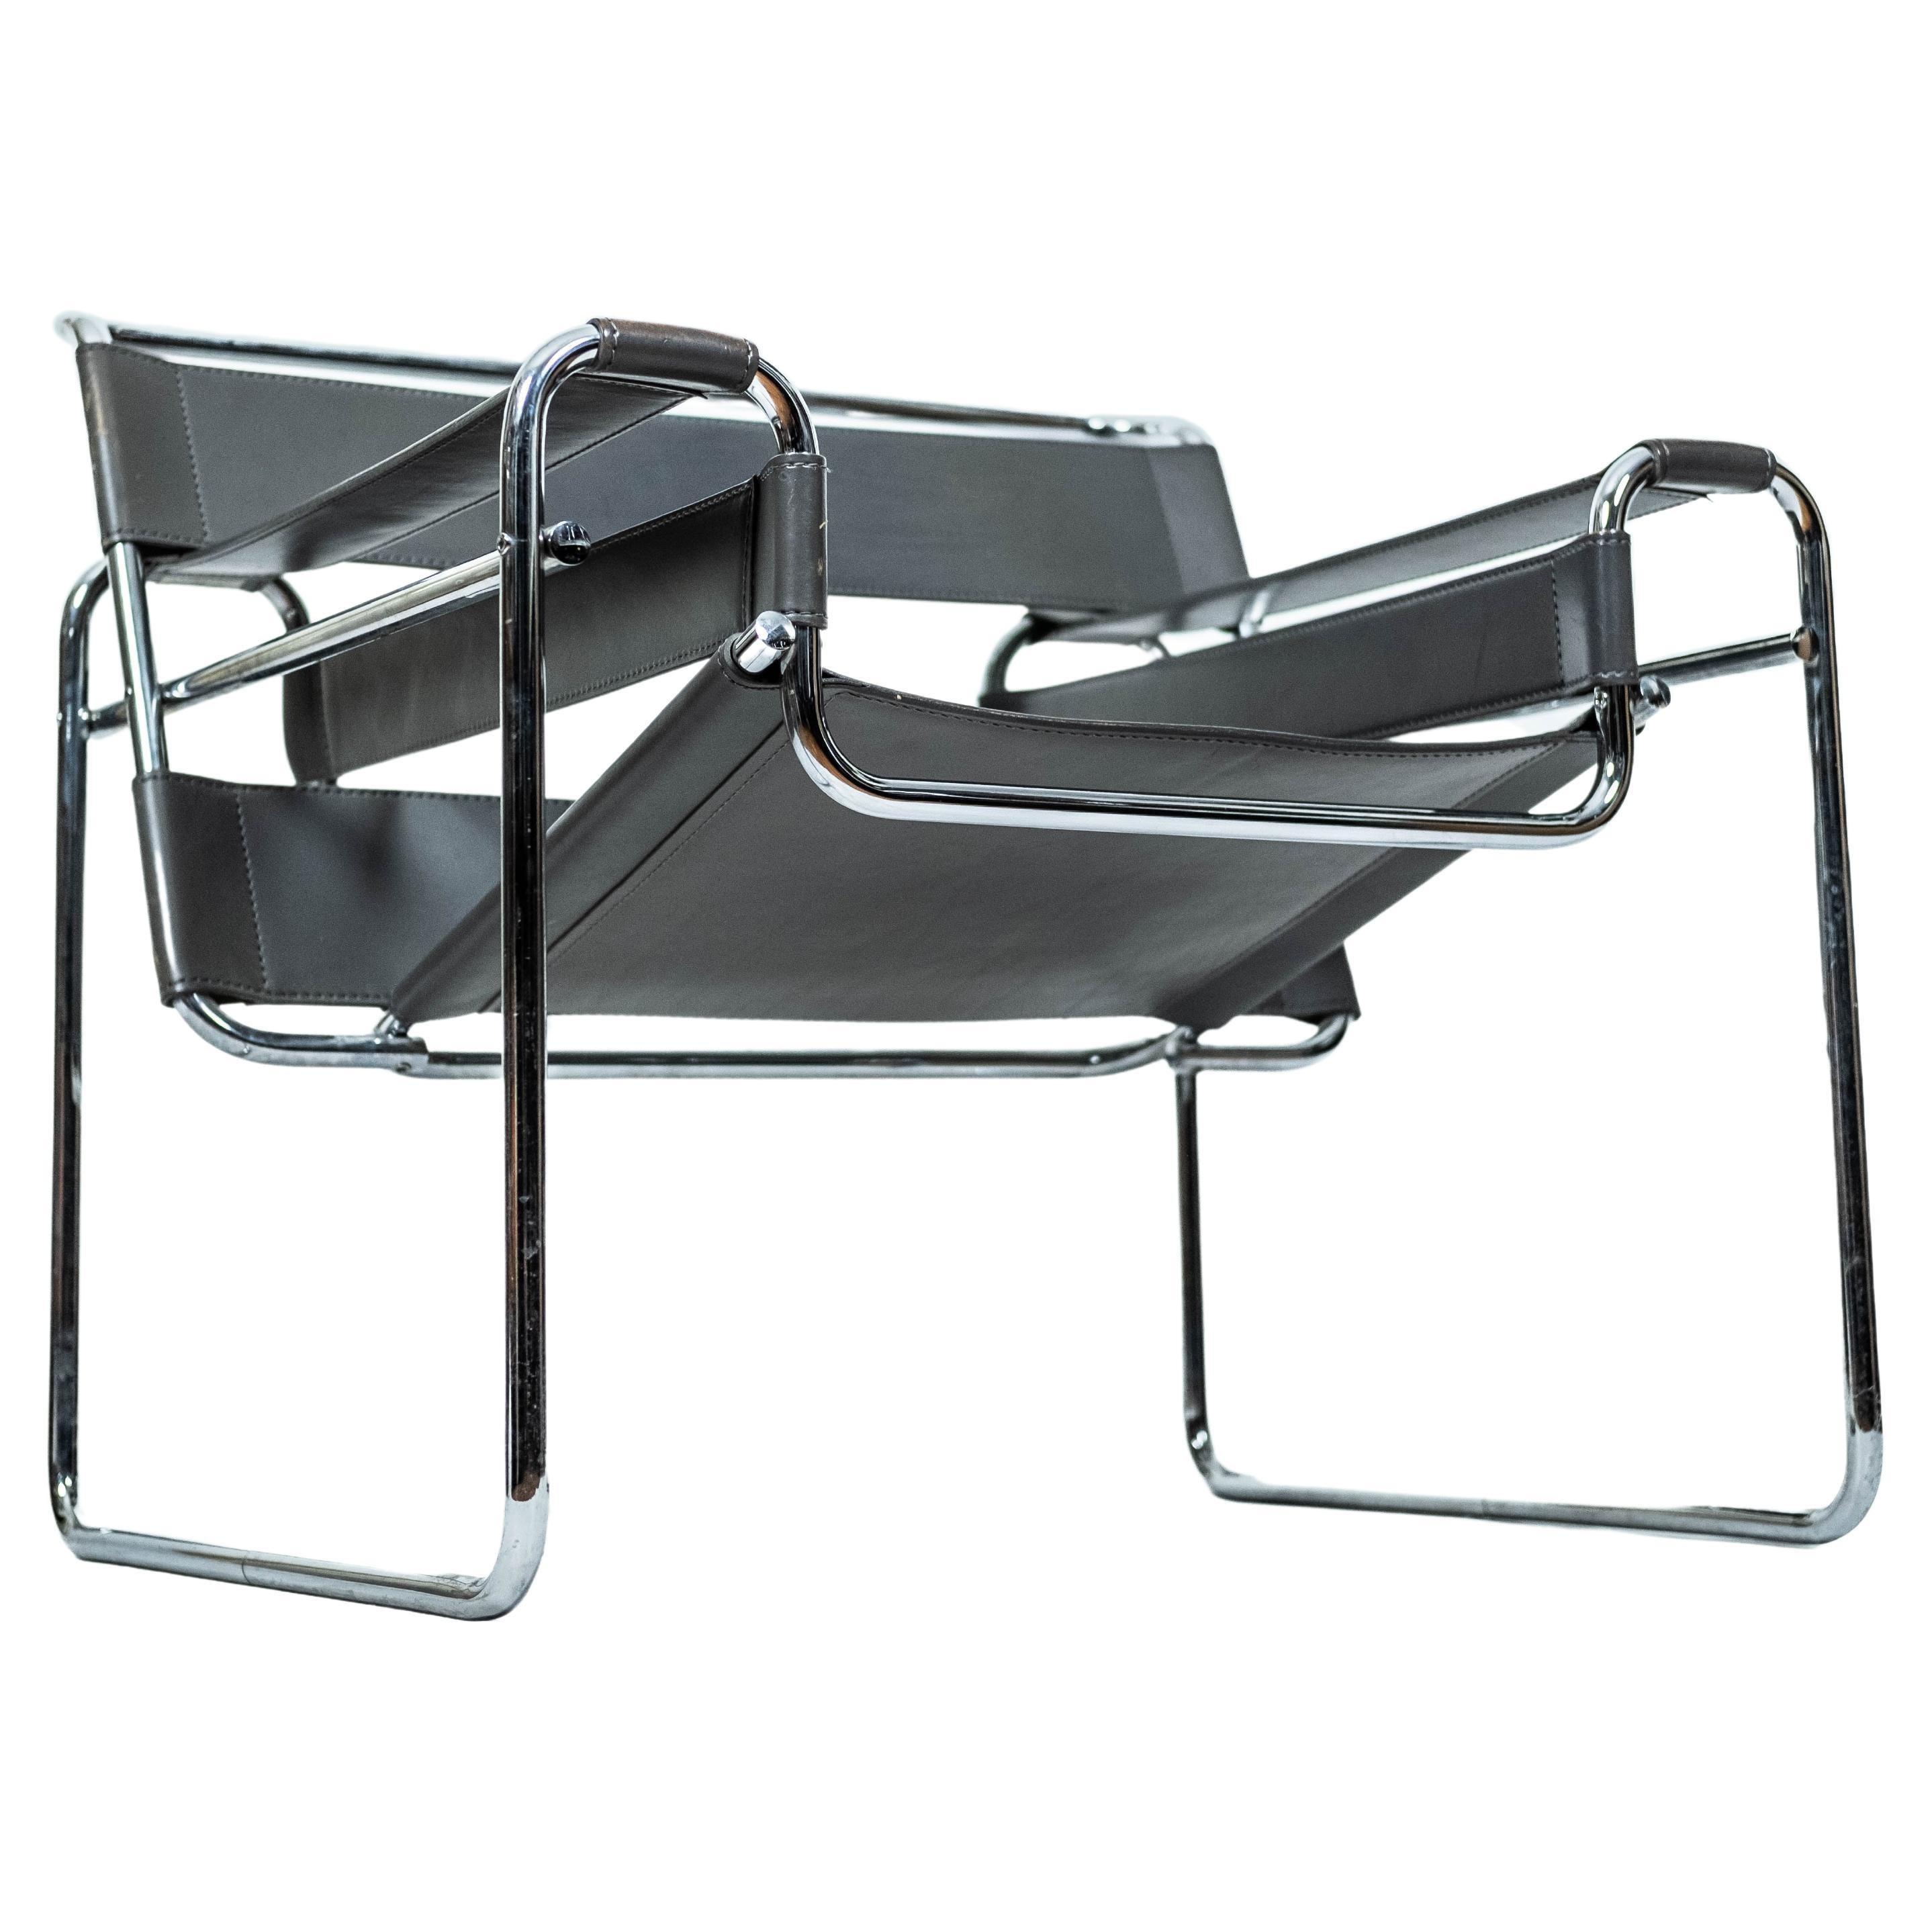 Bauhaus Wassily Chair ("B3") from Marcel Breuer, by Gavina (Italy, 1970) For Sale